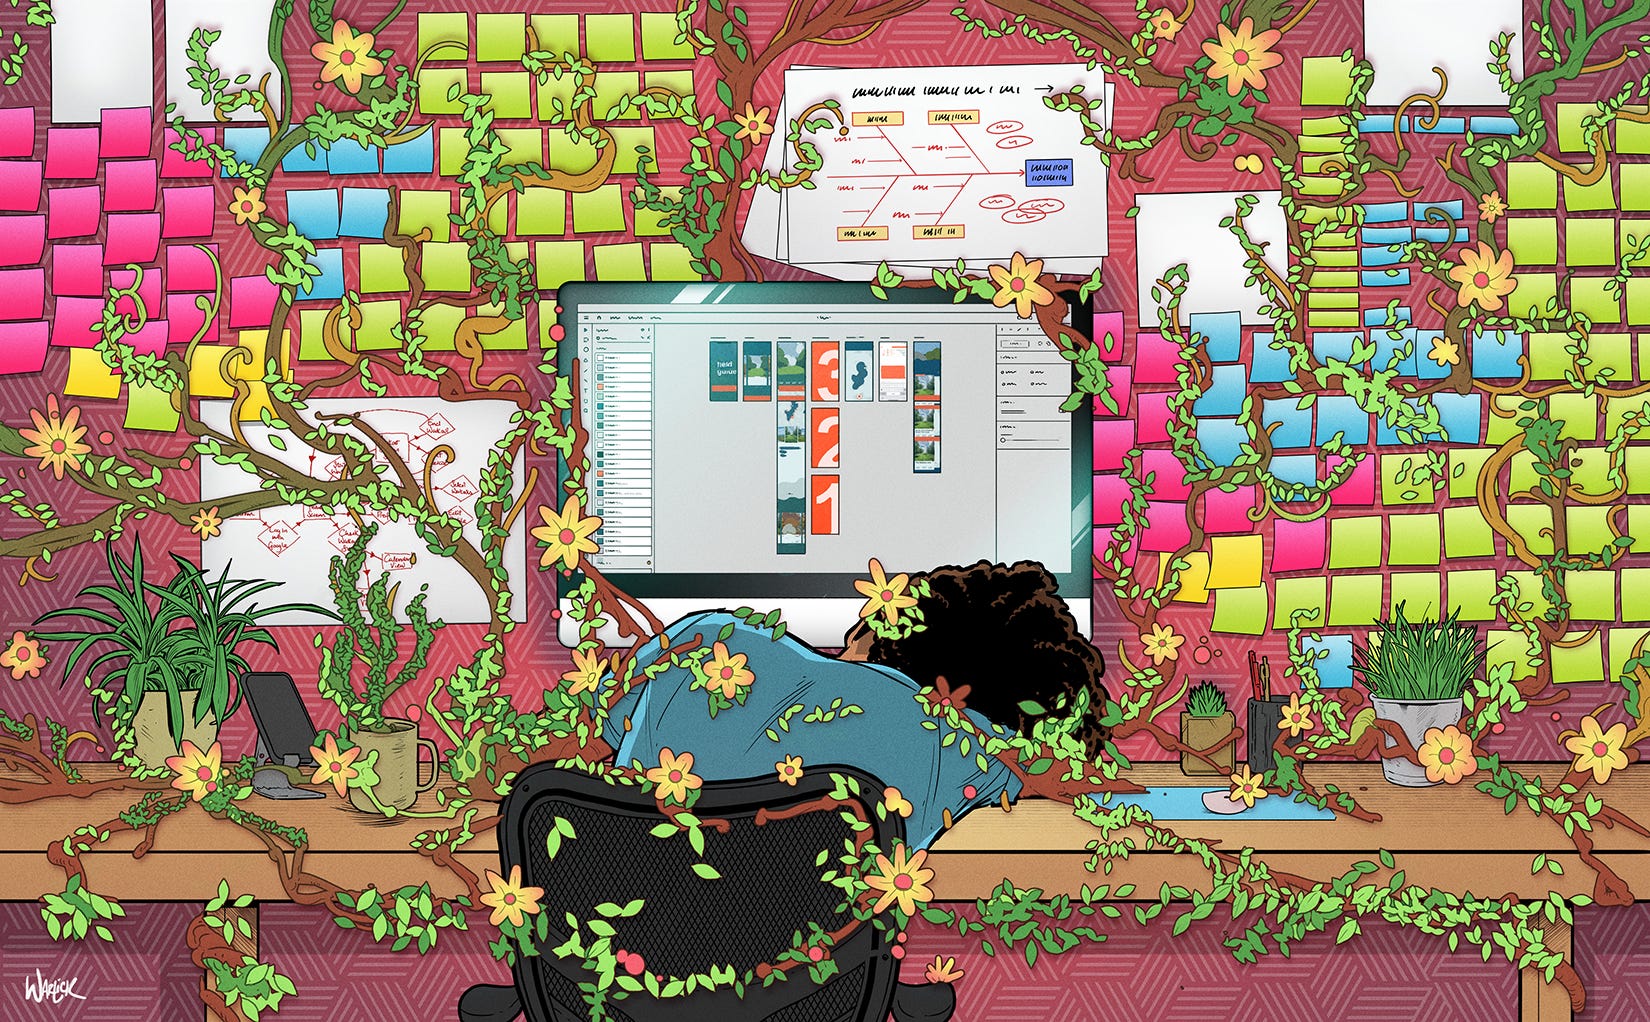 An exhausted UX designer with her head down at her workstation, completely covered in vines evoking urban decay and neglect. On the computer screen is an open design program of UI layouts. On the wall behind are lots of Post-its and a few notes and fishbone diagrams.